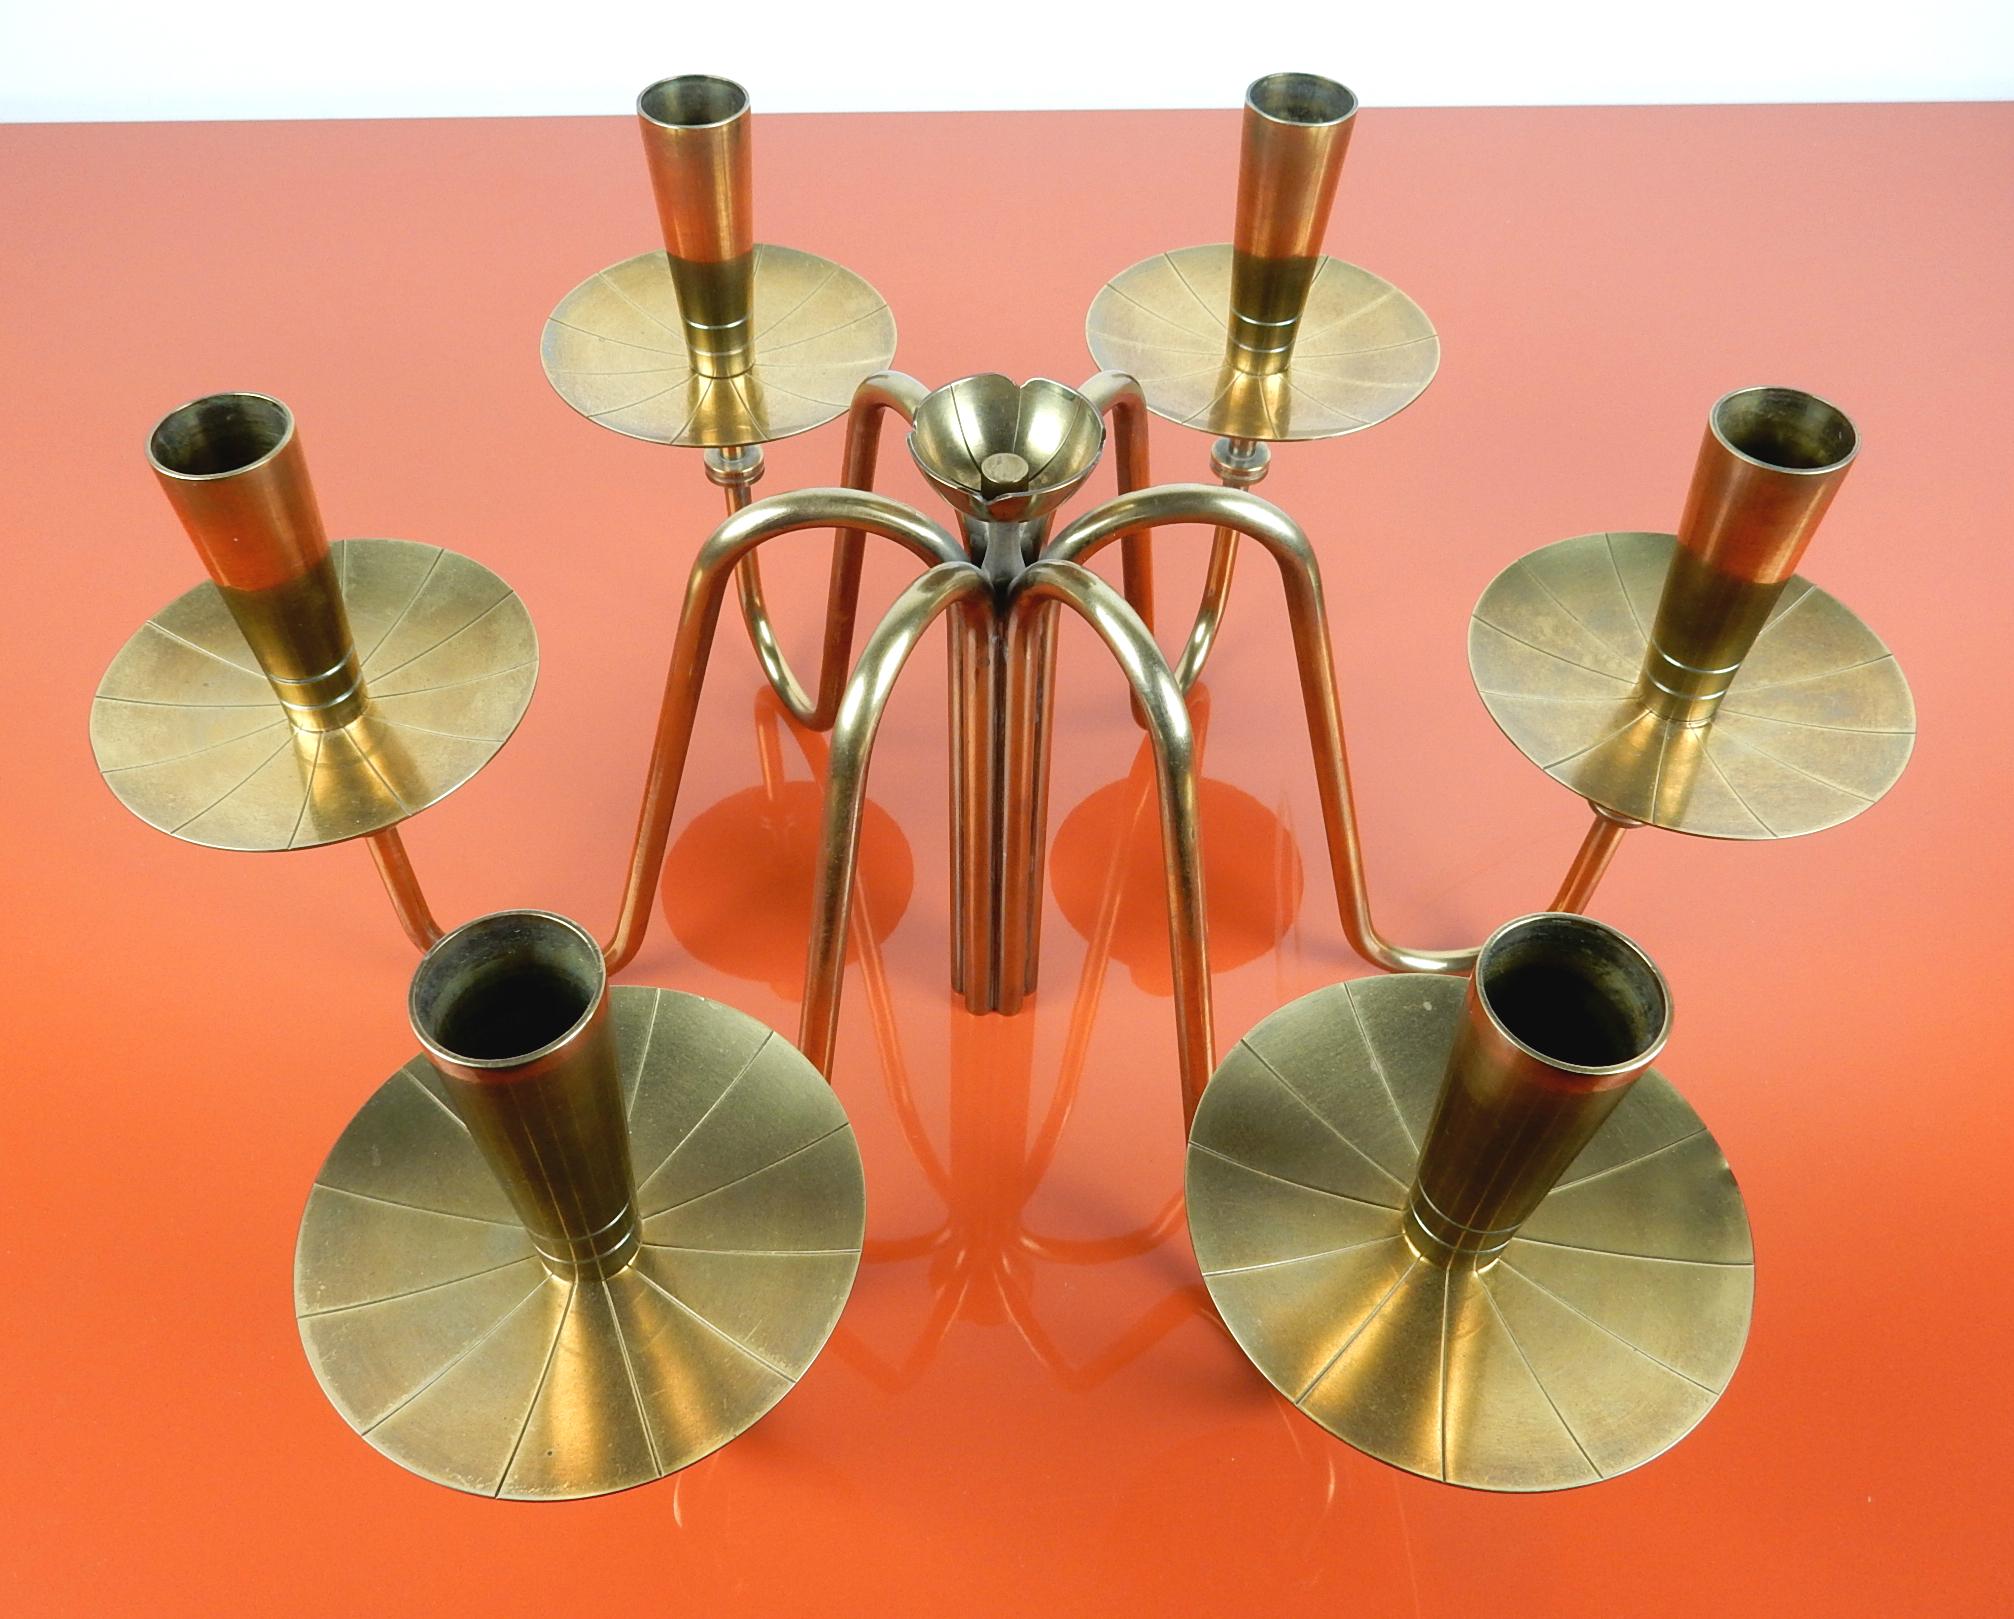 Amazing organic lotus candelabra centerpiece designed by Tommi Parzinger.
Made of solid brass with warm aged patina. 